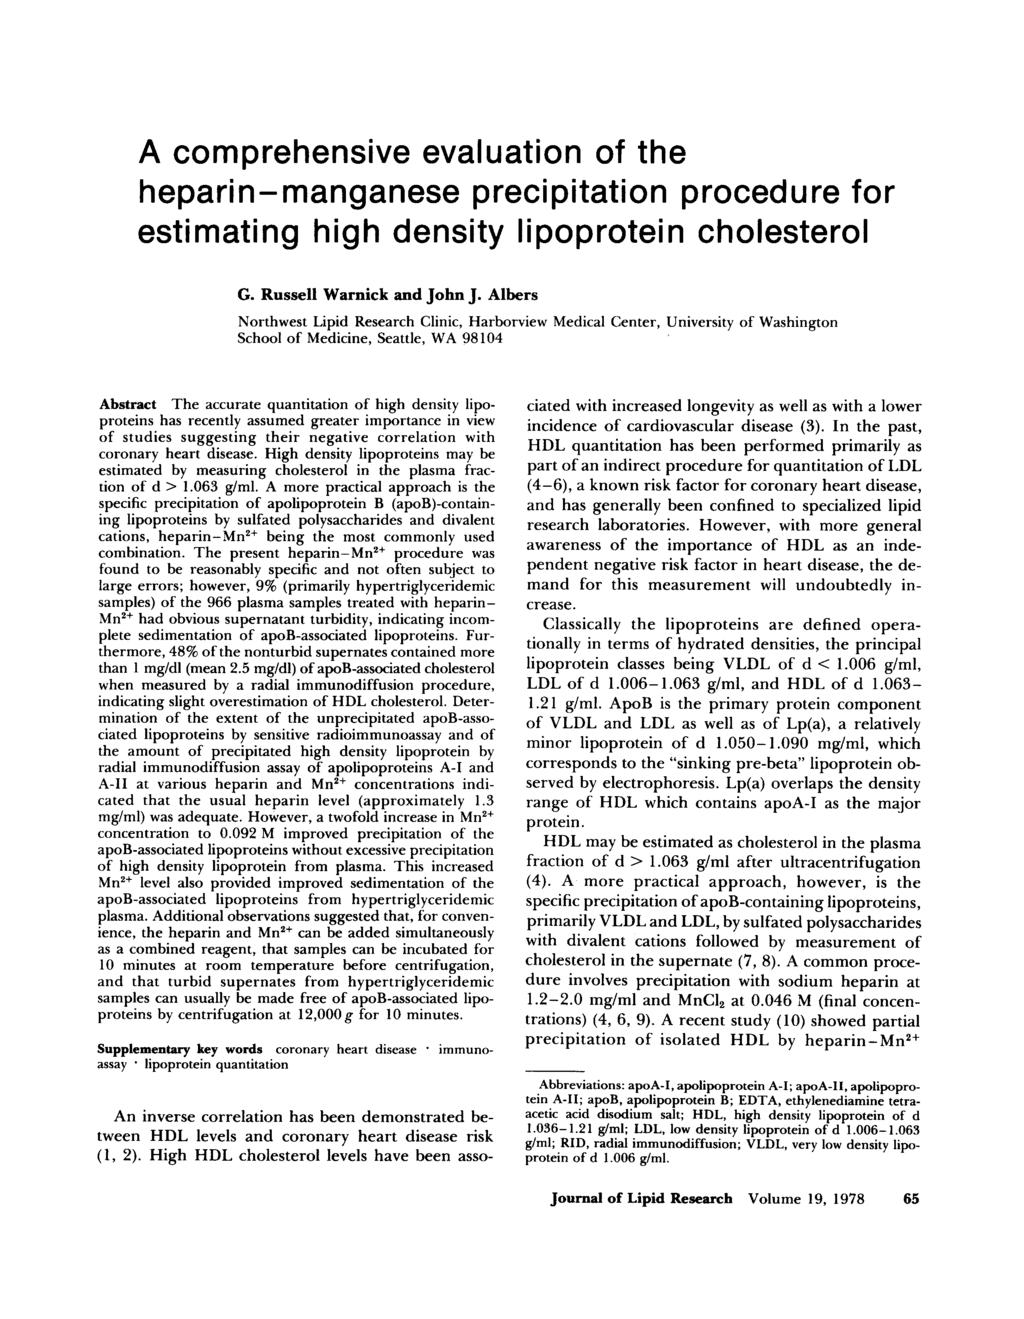 A comprehensive evaluation of the heparin-manganese precipitation procedure for estimating high density lipoprotein cholesterol G. Russell Warnick and John J.